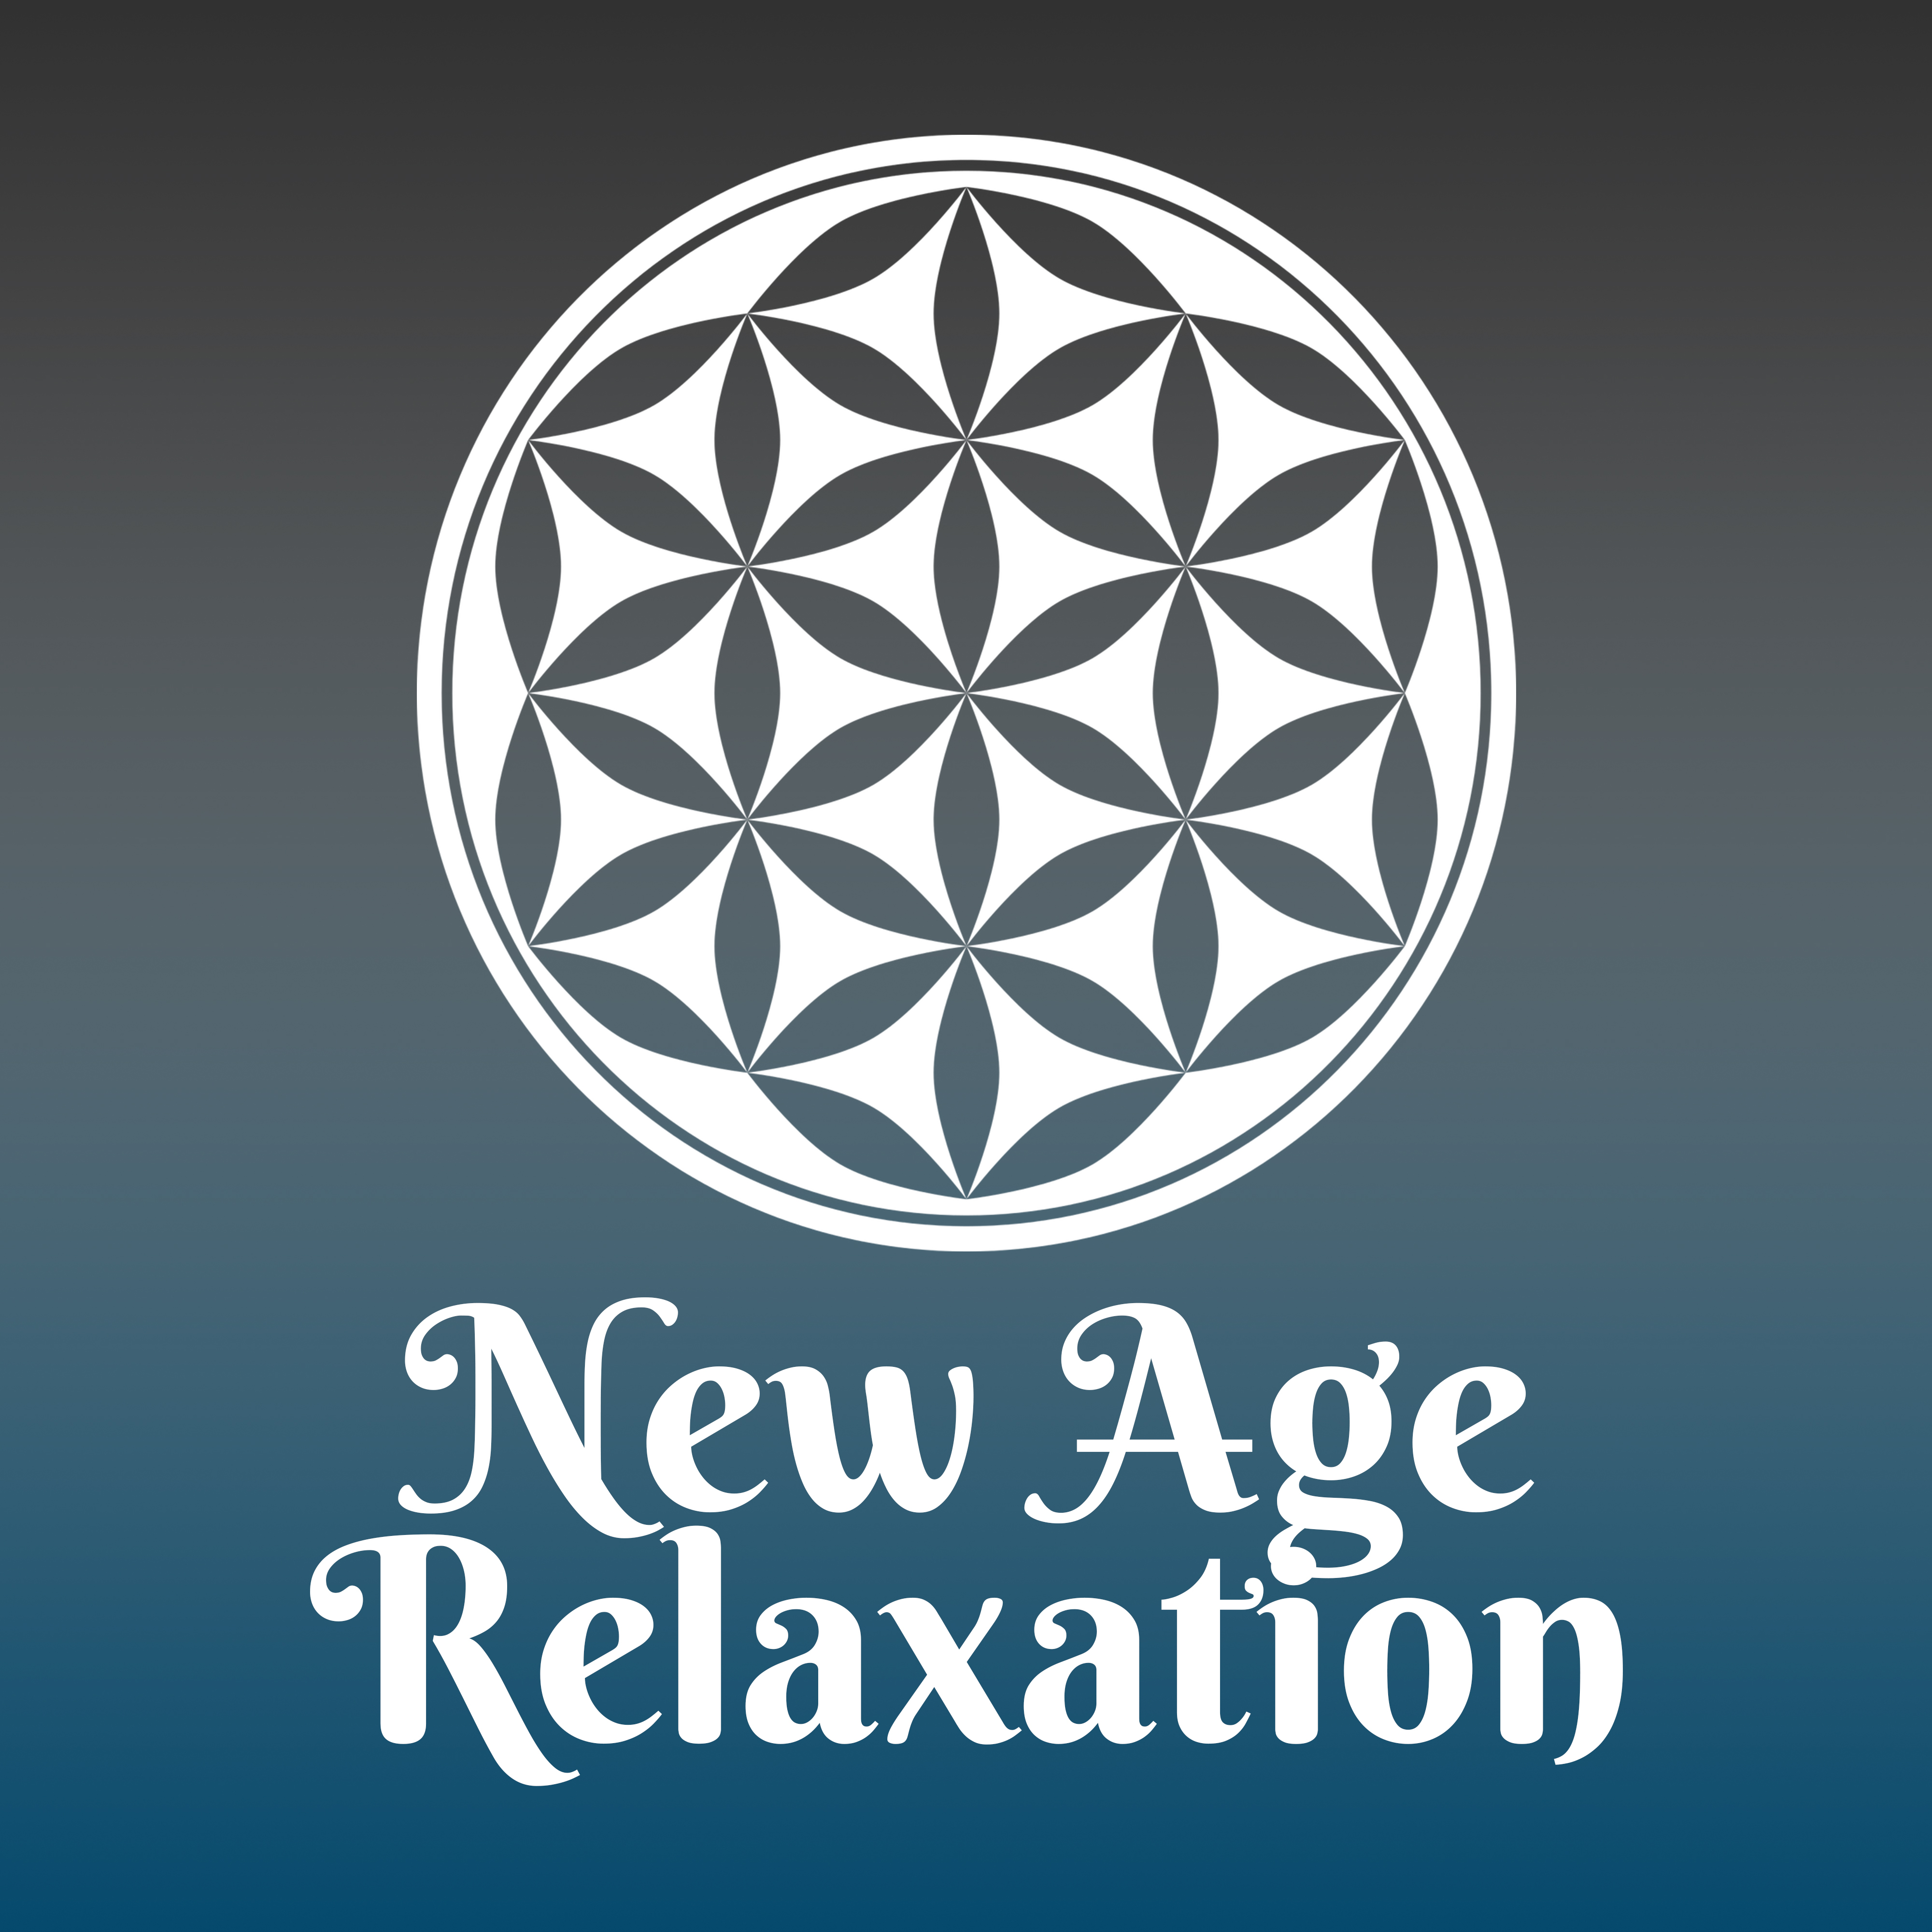 New Age Relaxation – Fresh New Age Album, Music for Relax Time, Rest, Reduce Anxiety & Relief Stress